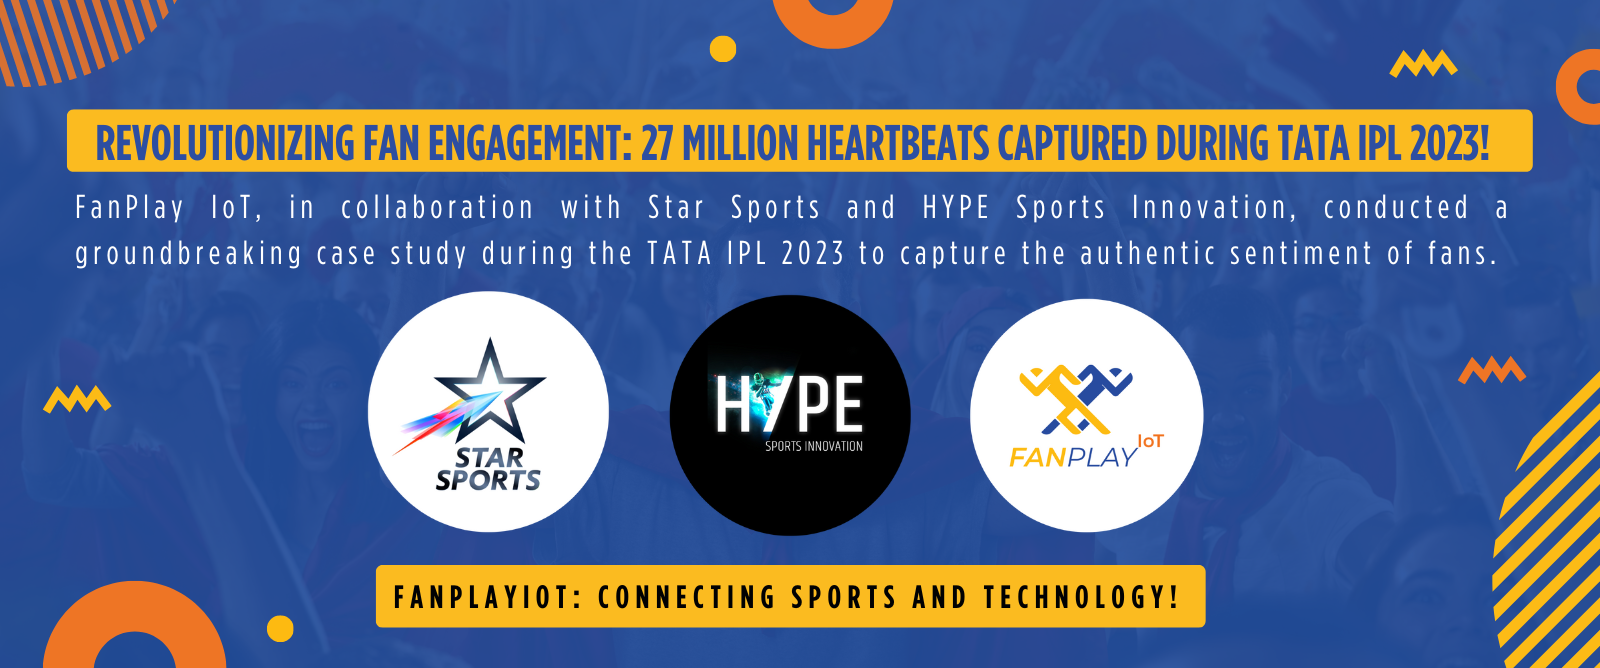 star sports hype and fanplay